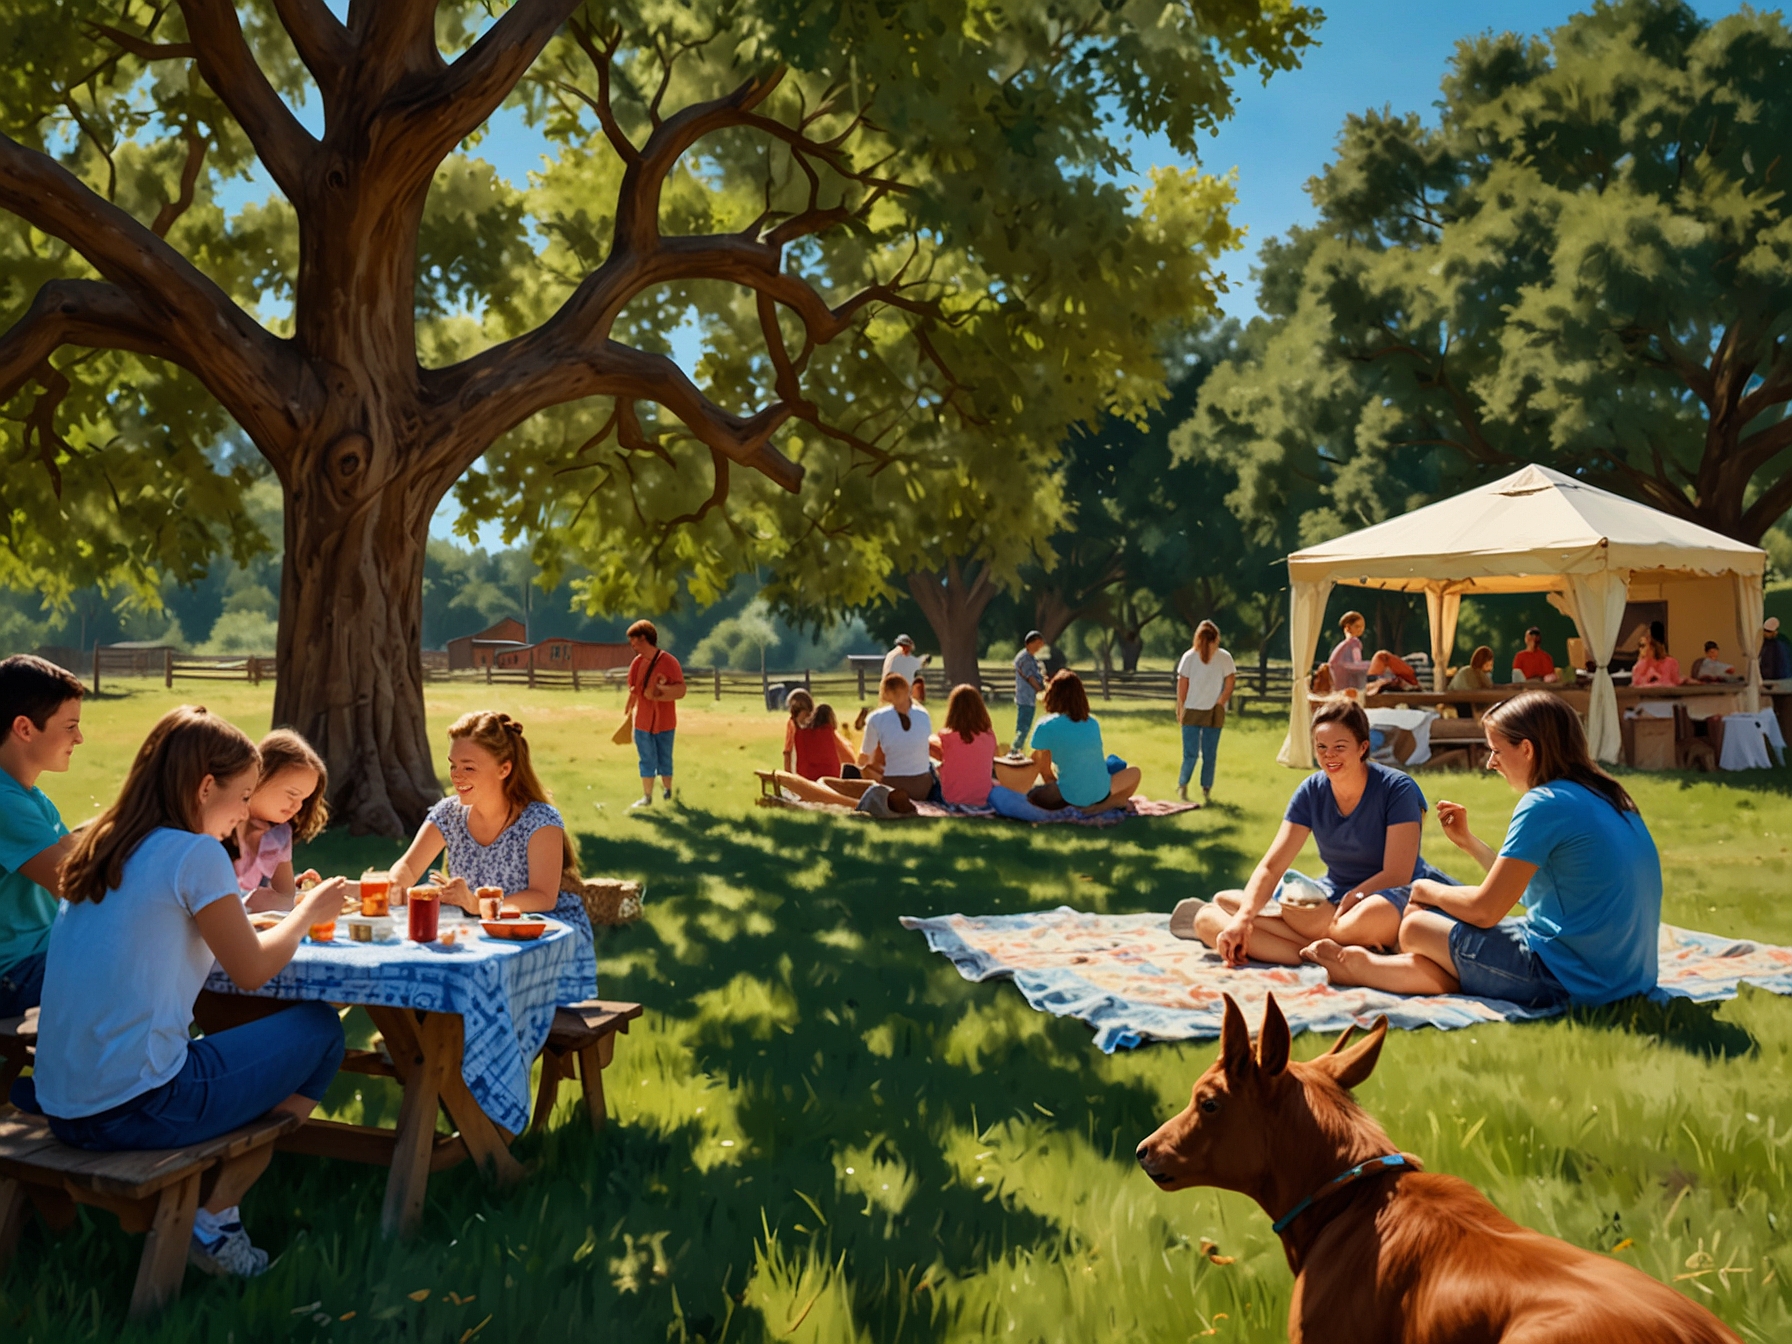 Visitors at Cajun Corral Farm enjoy a sunny picnic under oak trees while children eagerly pet and play with friendly goats, including the event's star, Rosemarie.